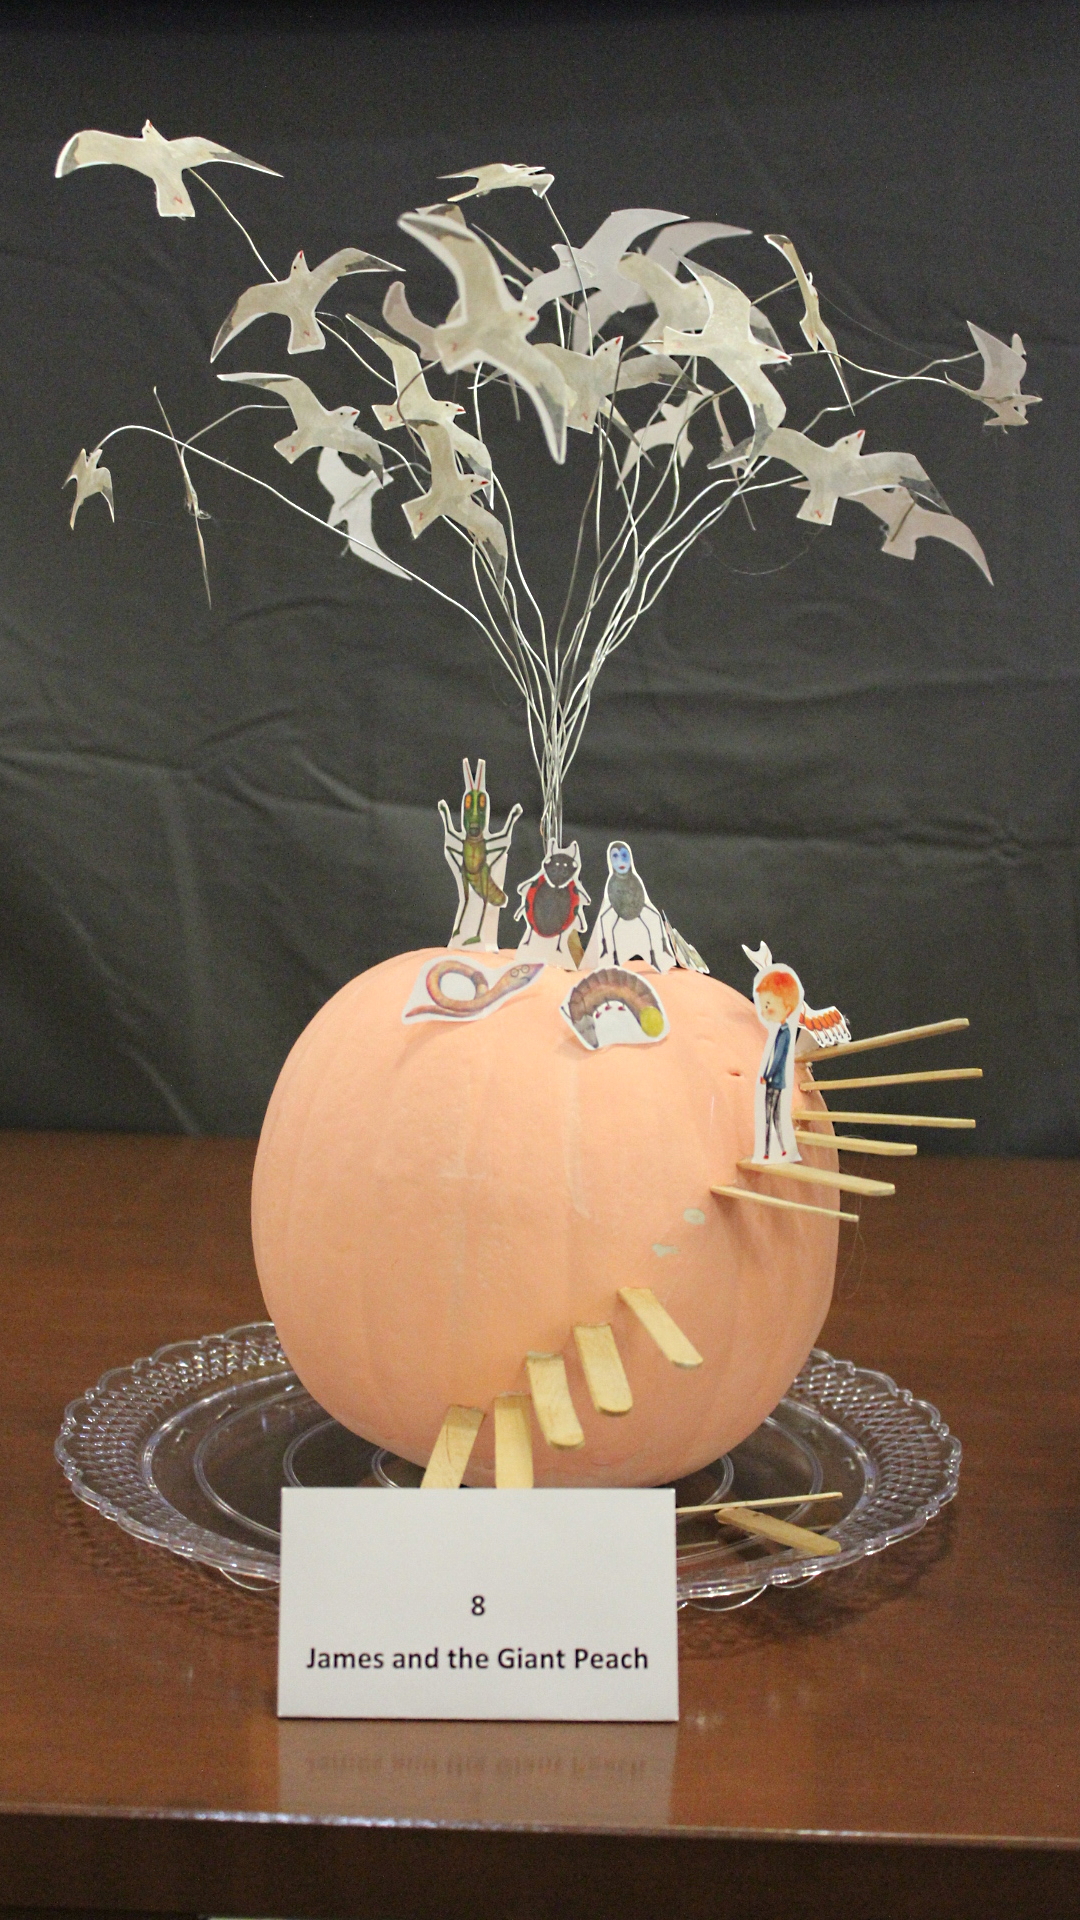 Pumpkin decorated as "James and the Giant Peach"